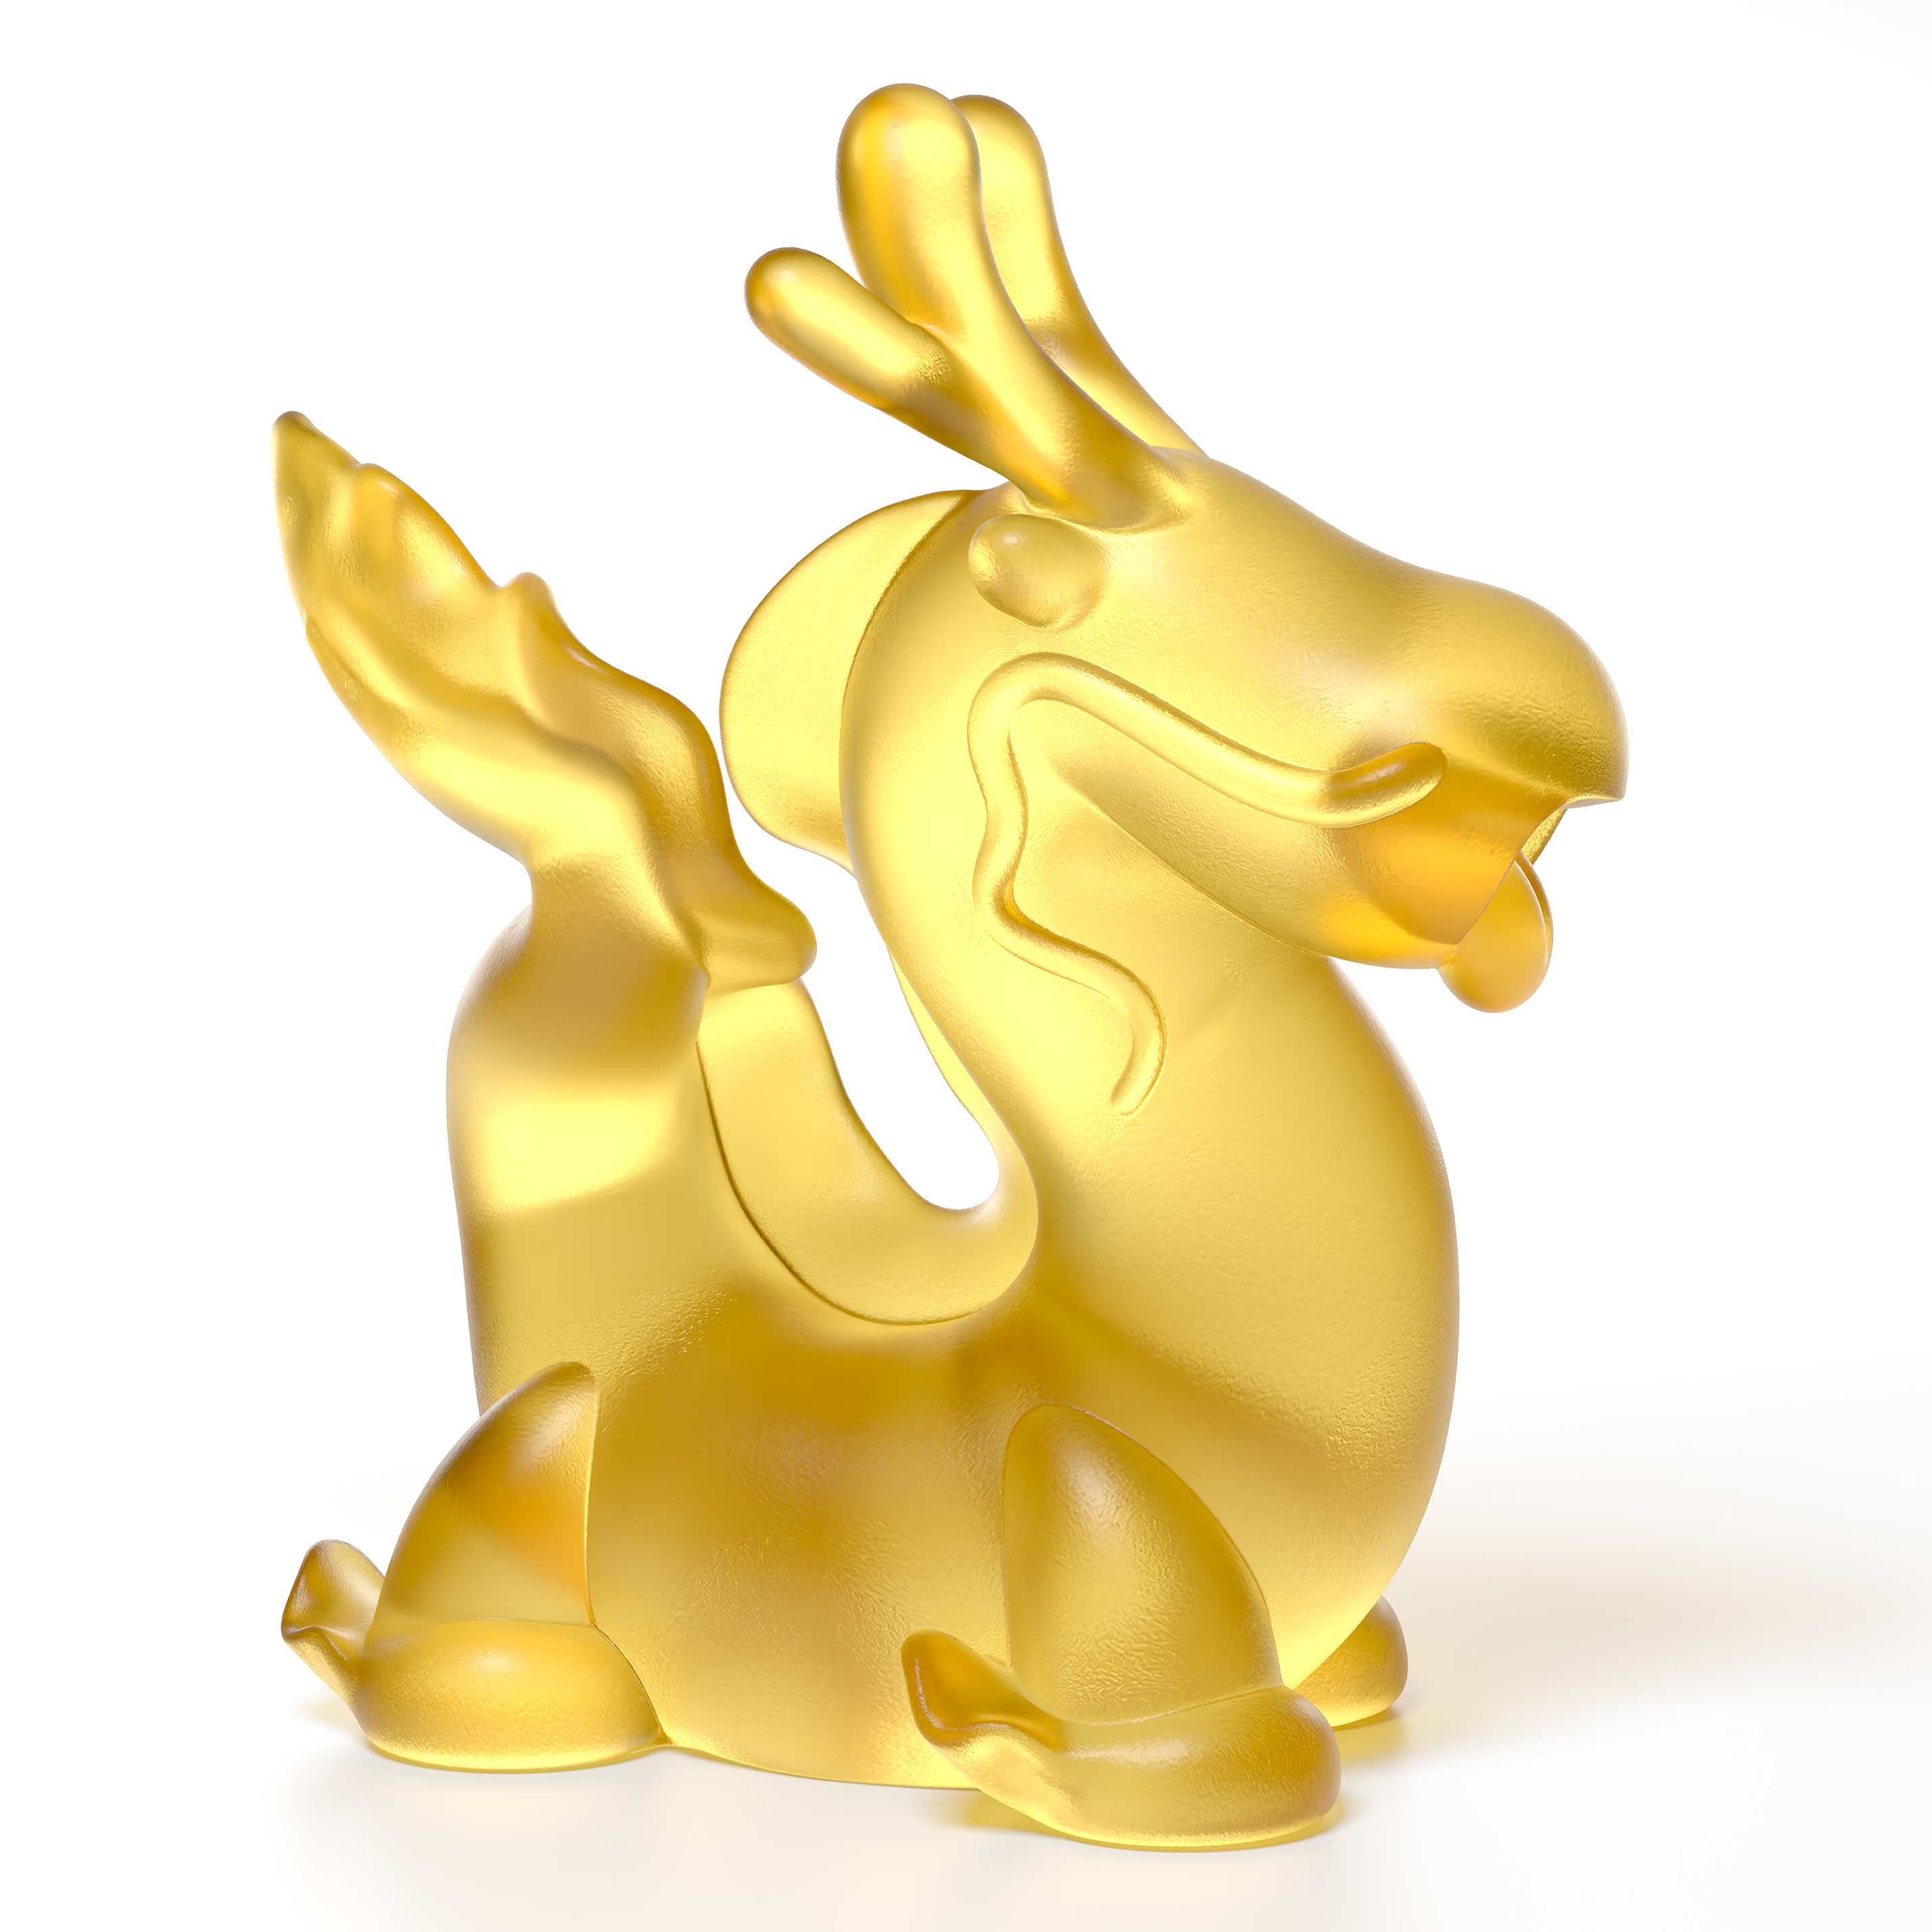 Dragon's Breath yellow crystal sculpture the size is  16 cm height,  by Ferdi B Dick, Limited edition of 50 side view 1